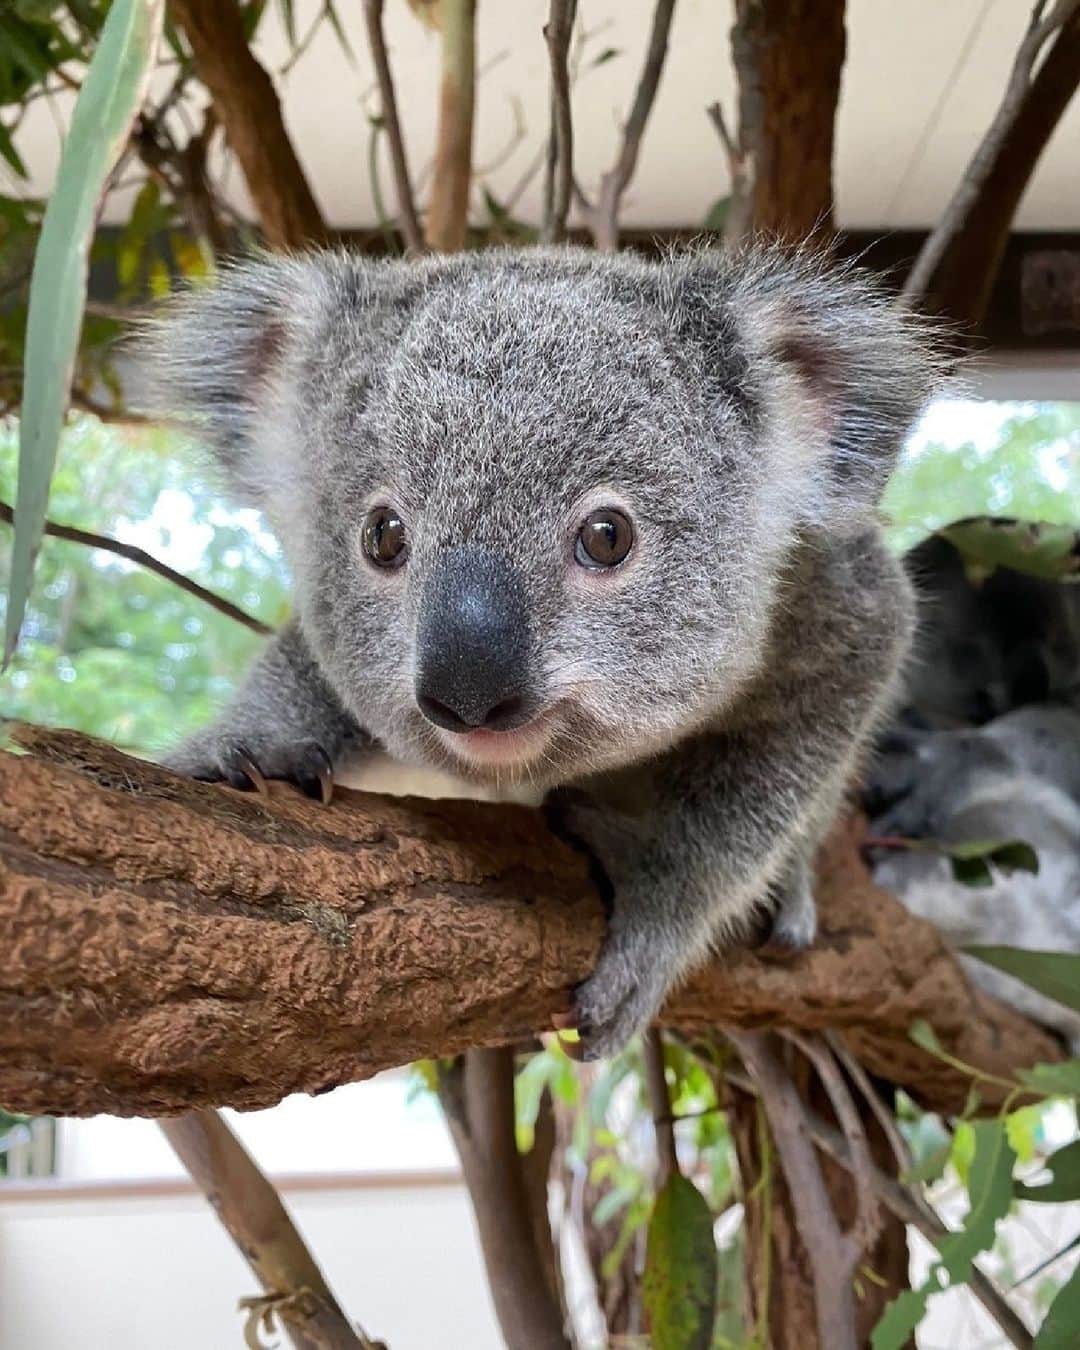 Australiaのインスタグラム：「"G'day! Welcome to Meanjin (@visitbrisbane) - I'll be your tour guide today!" 🐨 For business groups venturing to @queensland's sunny capital, a visit to @lonepinekoala is a *must*. Accessible via a picturesque private charter boat trip down the #BrisbaneRiver, say a hearty hello to the adorable residents (including koalas, kangaroos, wallabies, echidnas, wombats, and dingoes!) before heading back into the city centre and reaching new heights with @storybridgeadventureclimb or enjoying a riverside cocktail at @howardsmithwharves.  #SeeAustralia #ComeAndSayGday #ThisIsQueensland #Dreamtime2023 #MeetInAus   ID: A close-up of a koala joey perched on a tree branch, staring directly into the camera amidst a backdrop of gum leaves.」